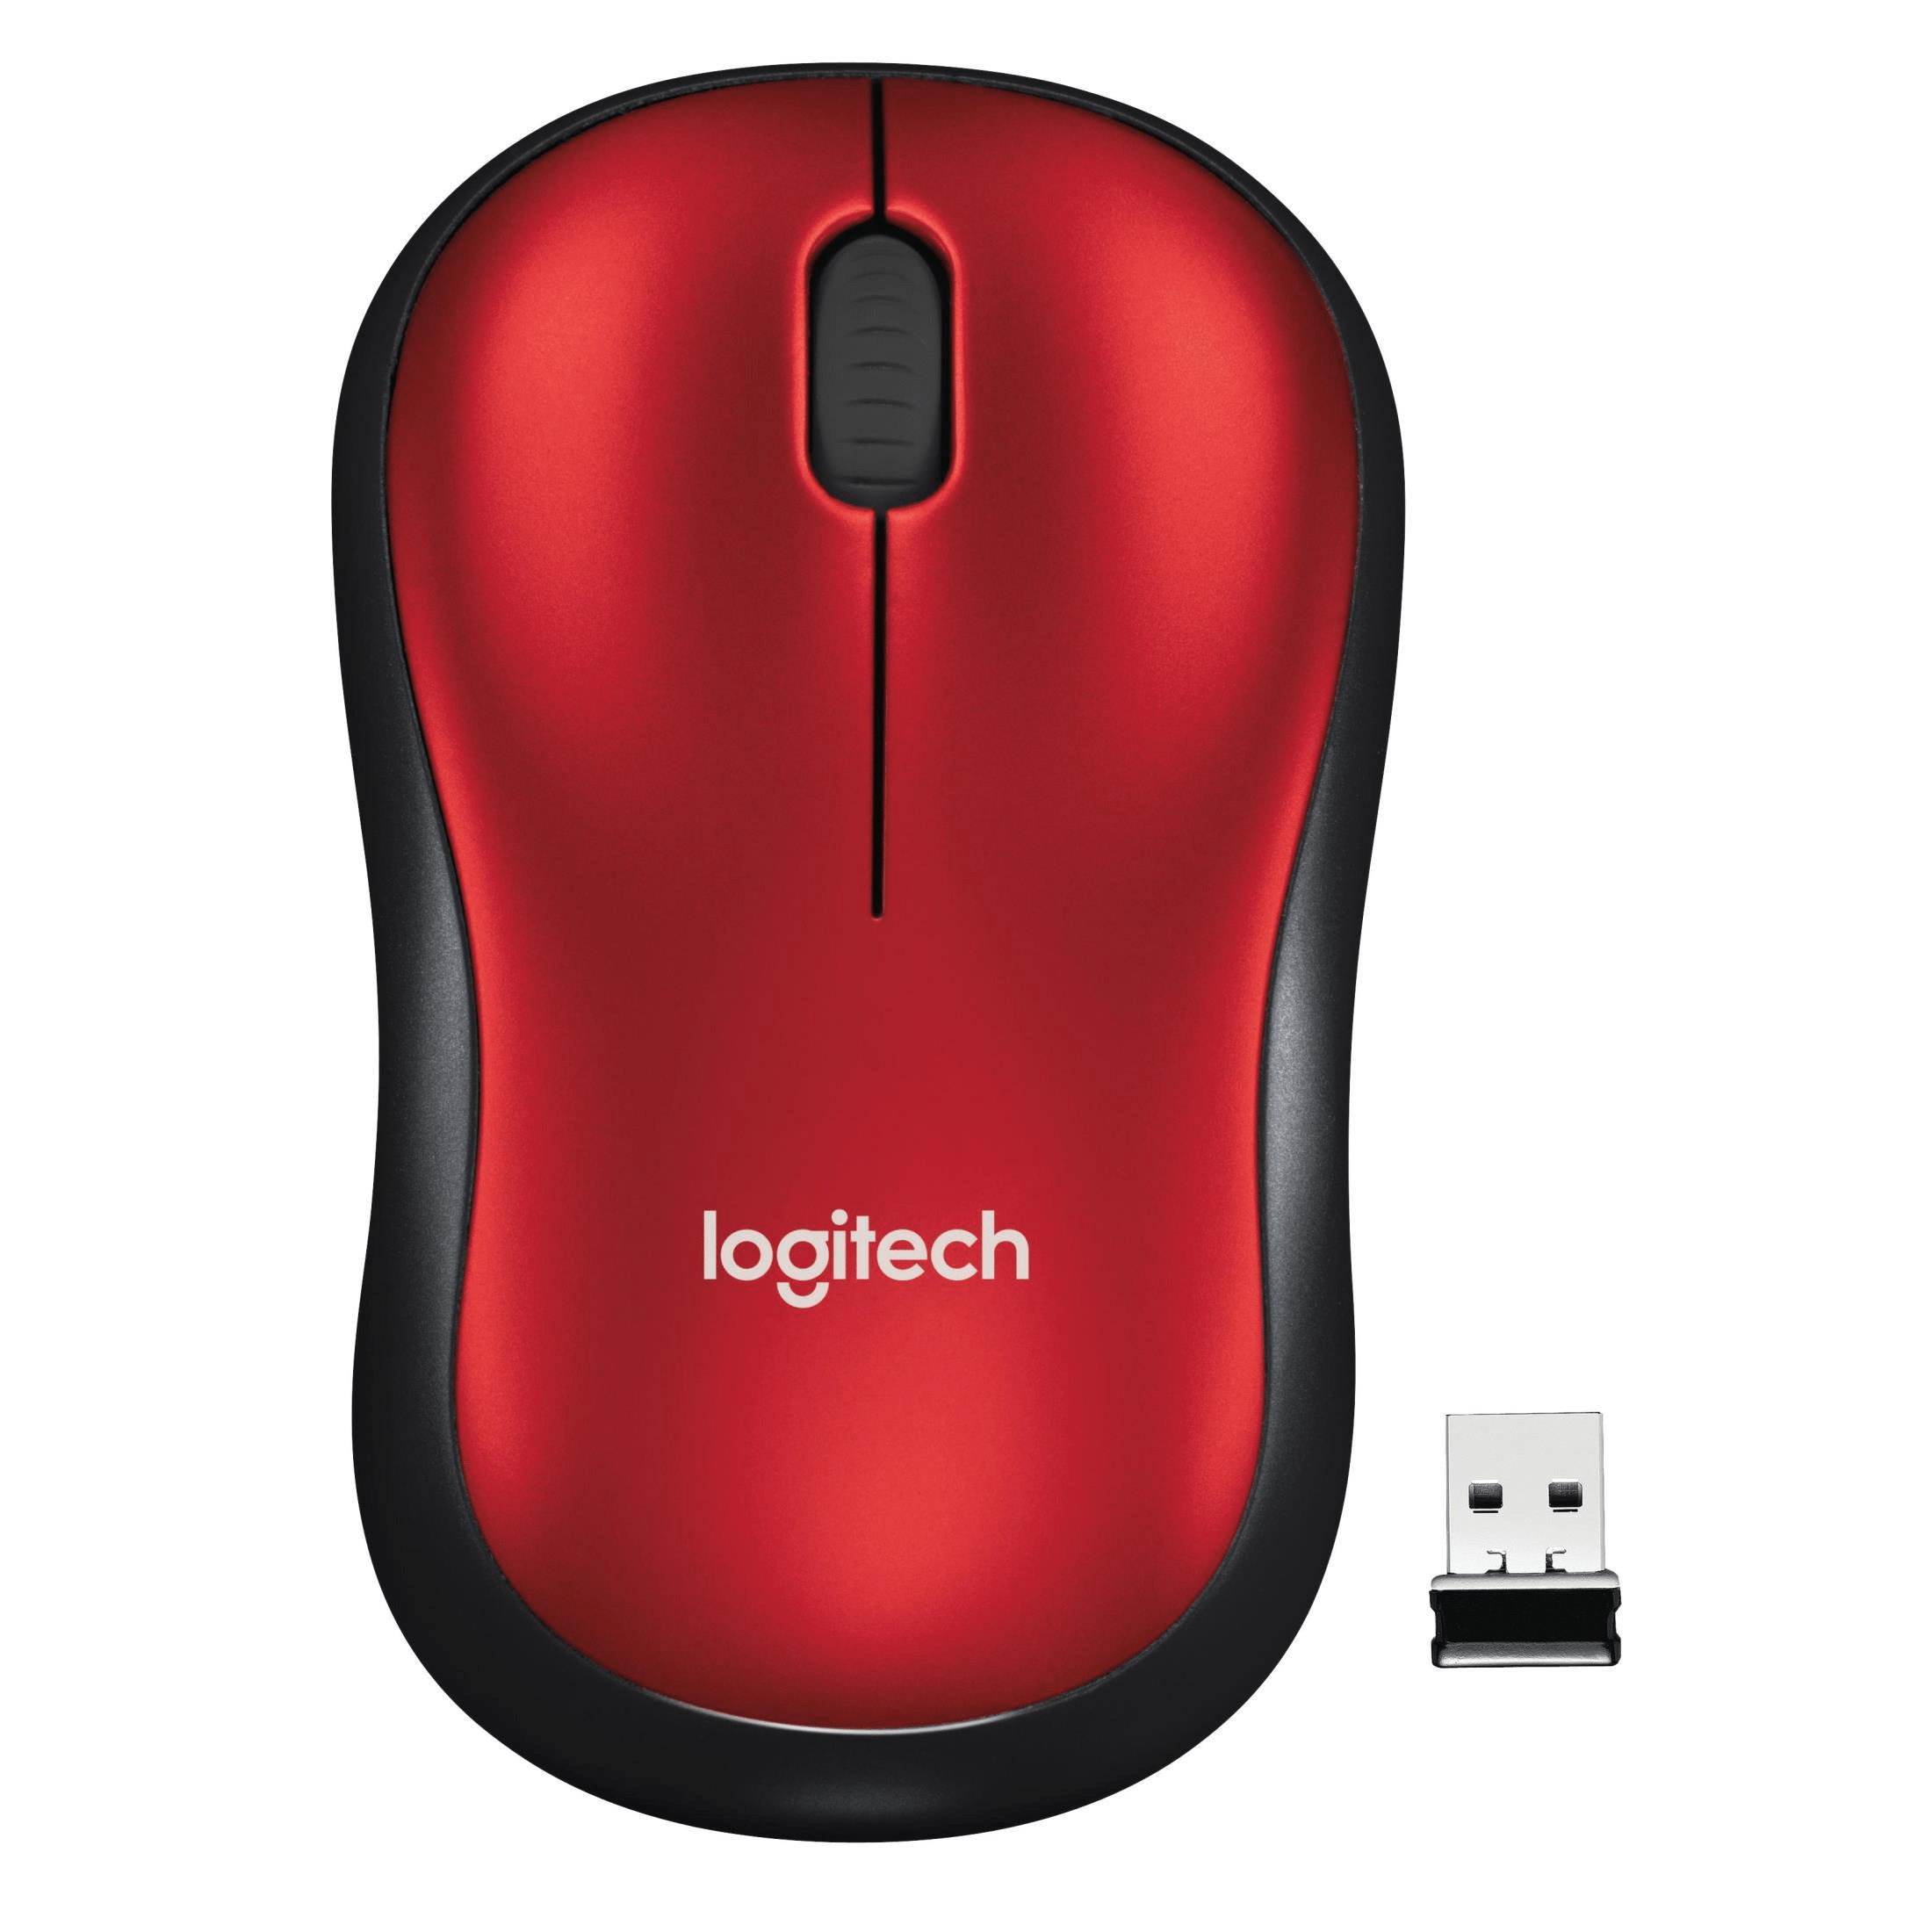 Logitech M185 Wireless Mouse 2.4 GHz USB 1000DPI 3 Buttons Silent Gaming  Optical Navigation Mice for PC/Laptop Mouse Gamer